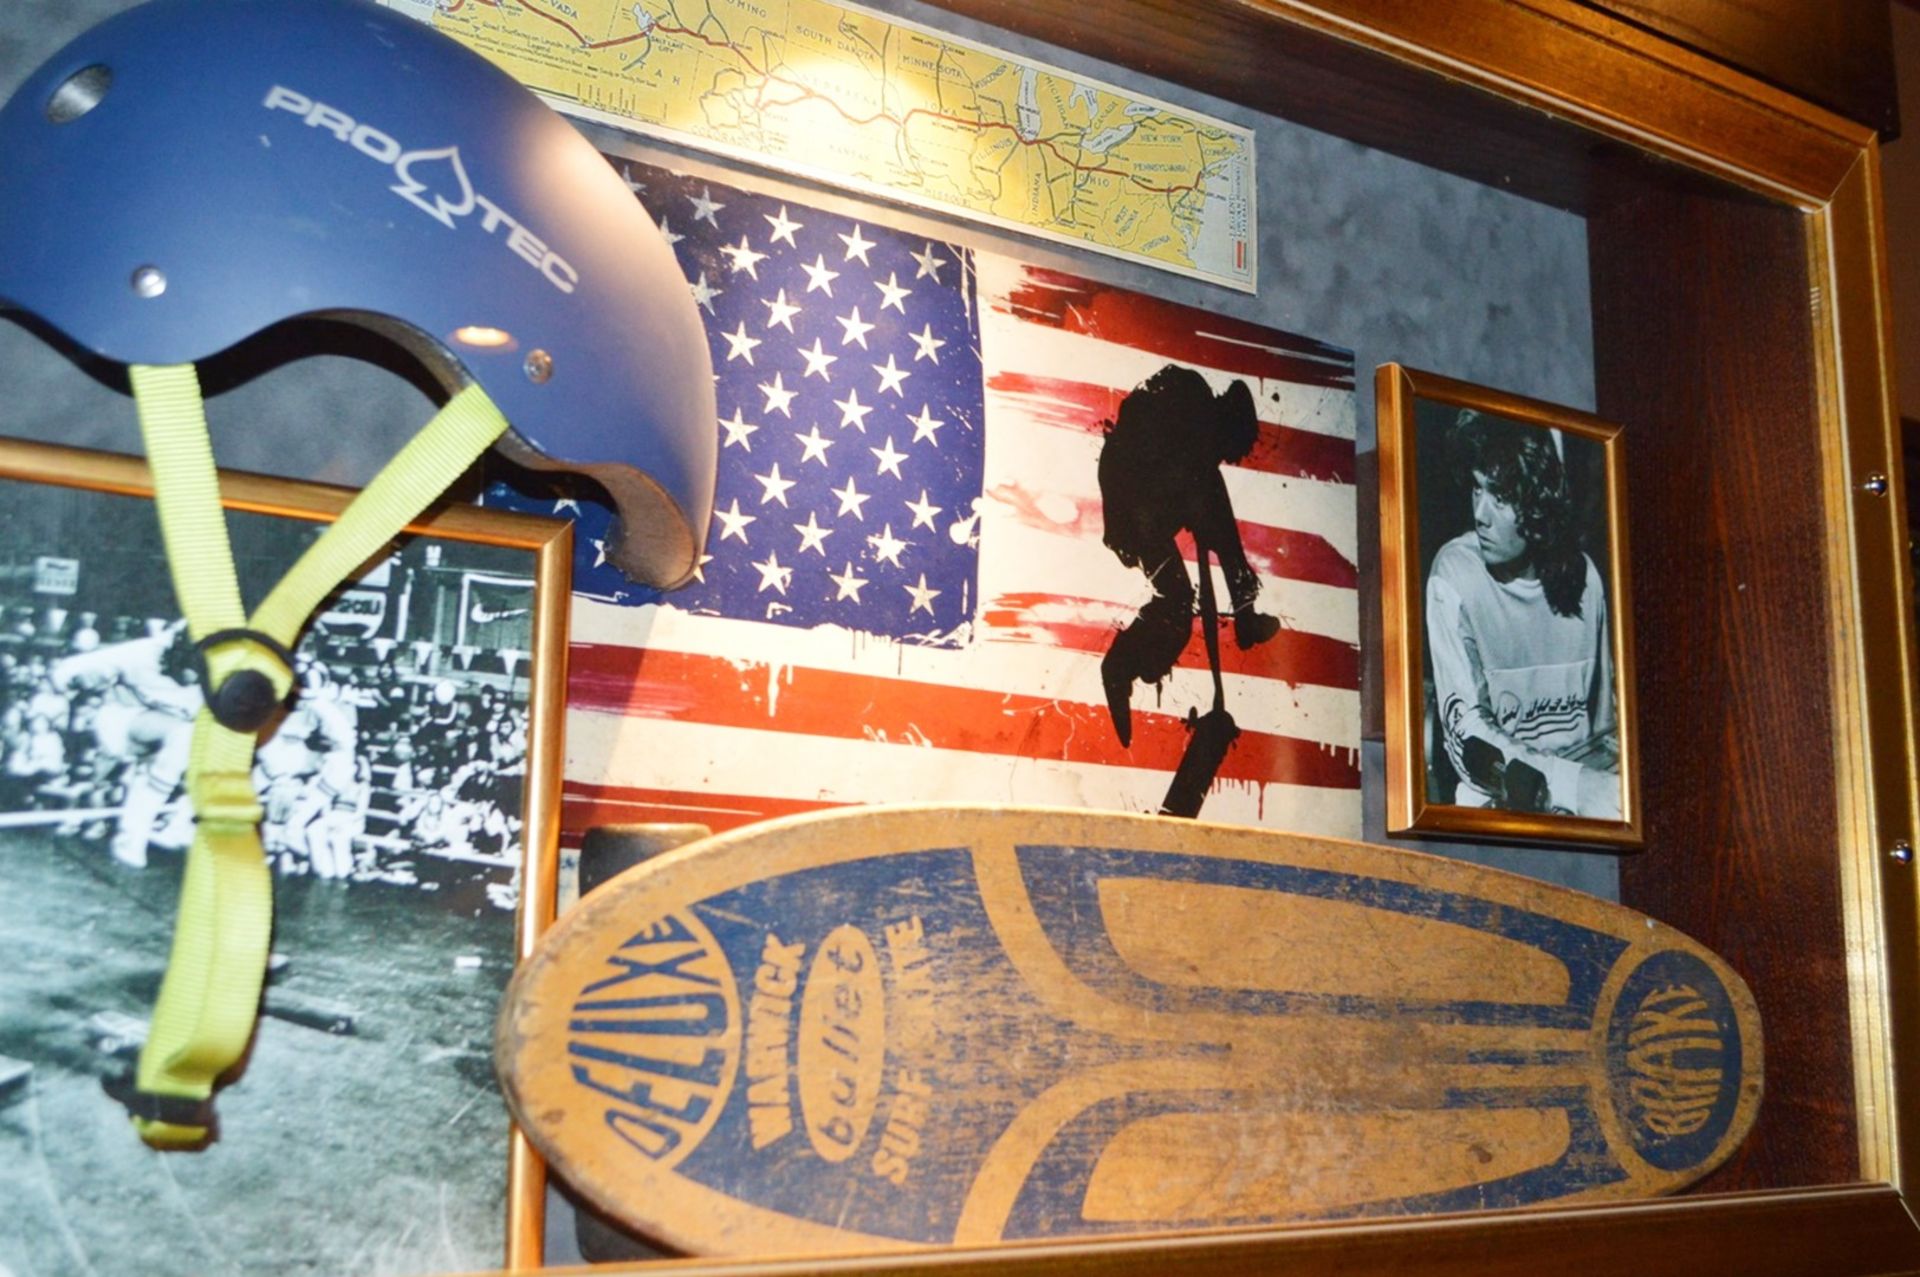 1 x Americana Wall Mounted Illuminated Display Case - SKATEBOARDING - Includes Various Images, - Image 3 of 8